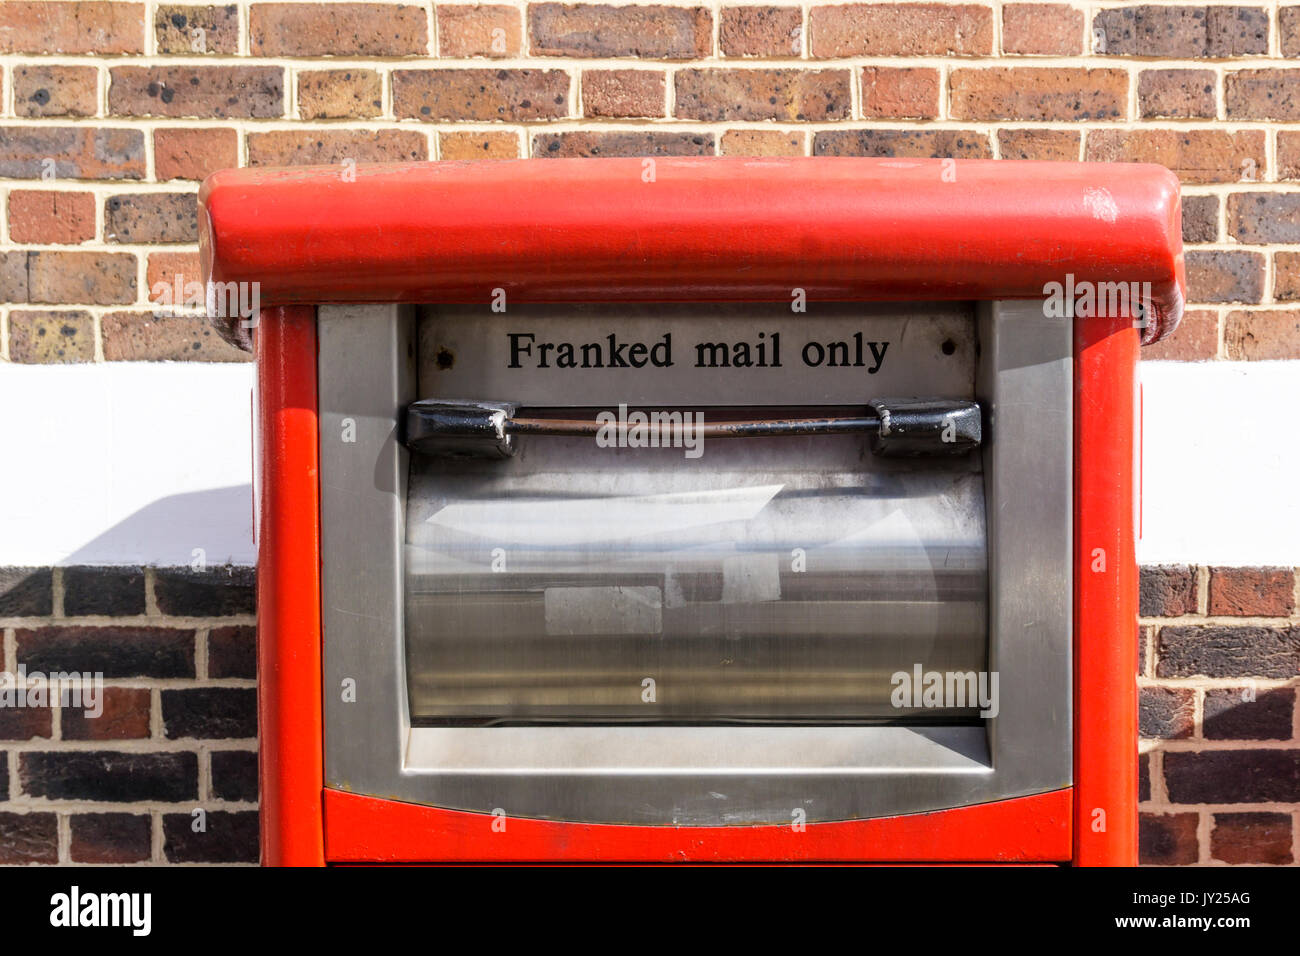 A pillar box for Franked Mail Only. Stock Photo